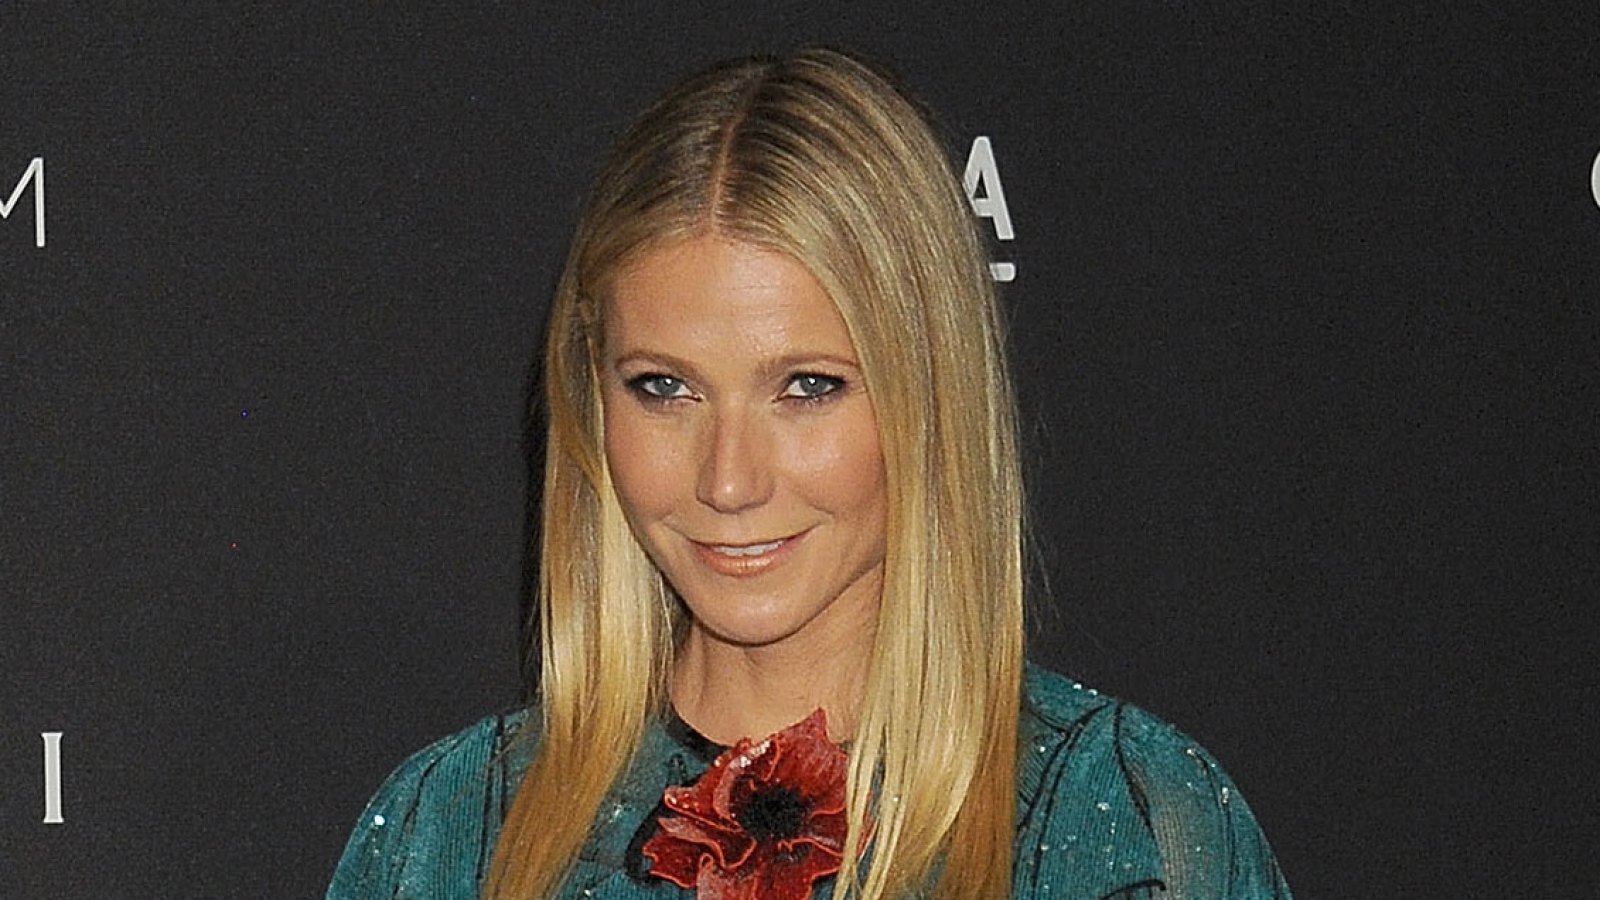 Gwyneth Paltrow spent Thanksgiving with her ex Chris Martin